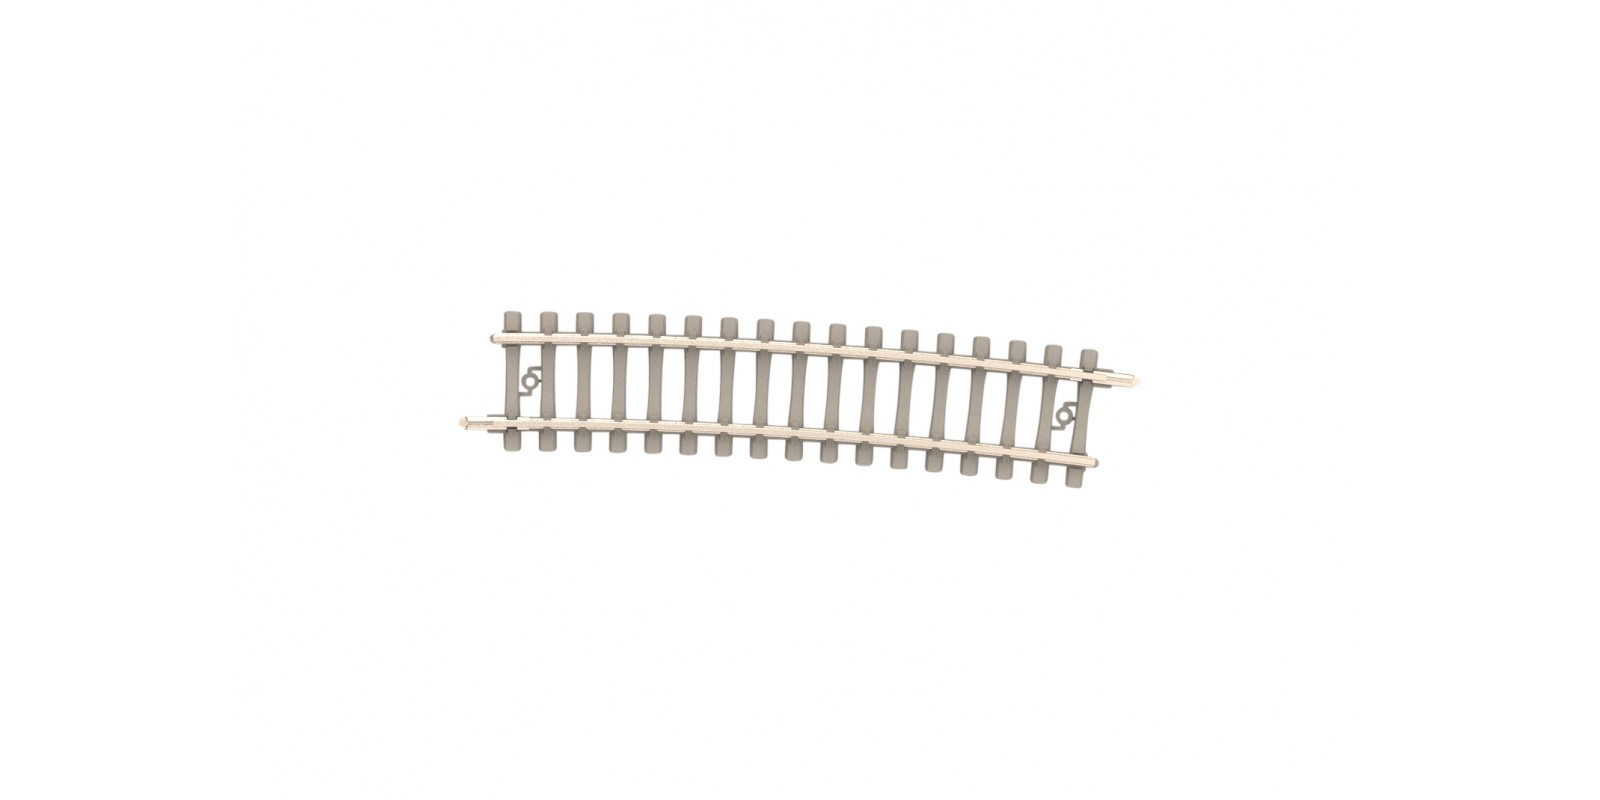 T14516 Curved Track with Concrete Ties